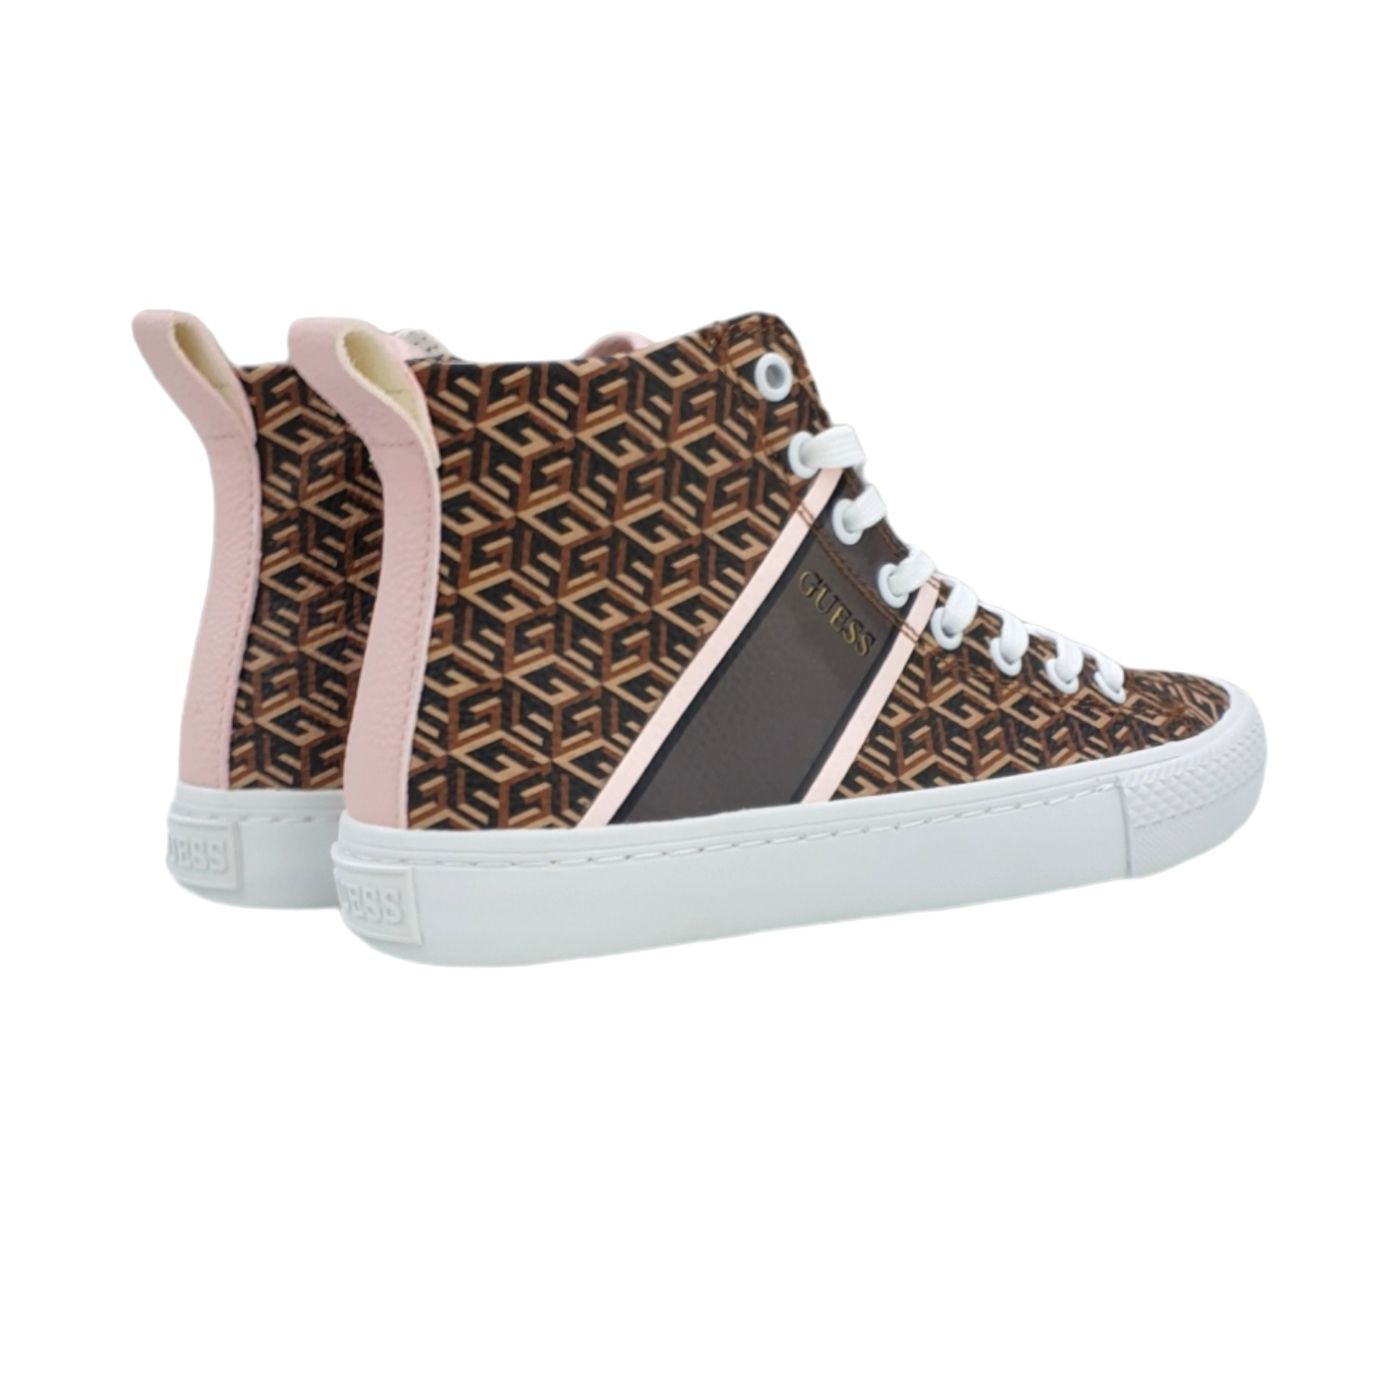 SNEAKERS GUESS DONNA  CON LOGO STAMPATO Guess walkingon